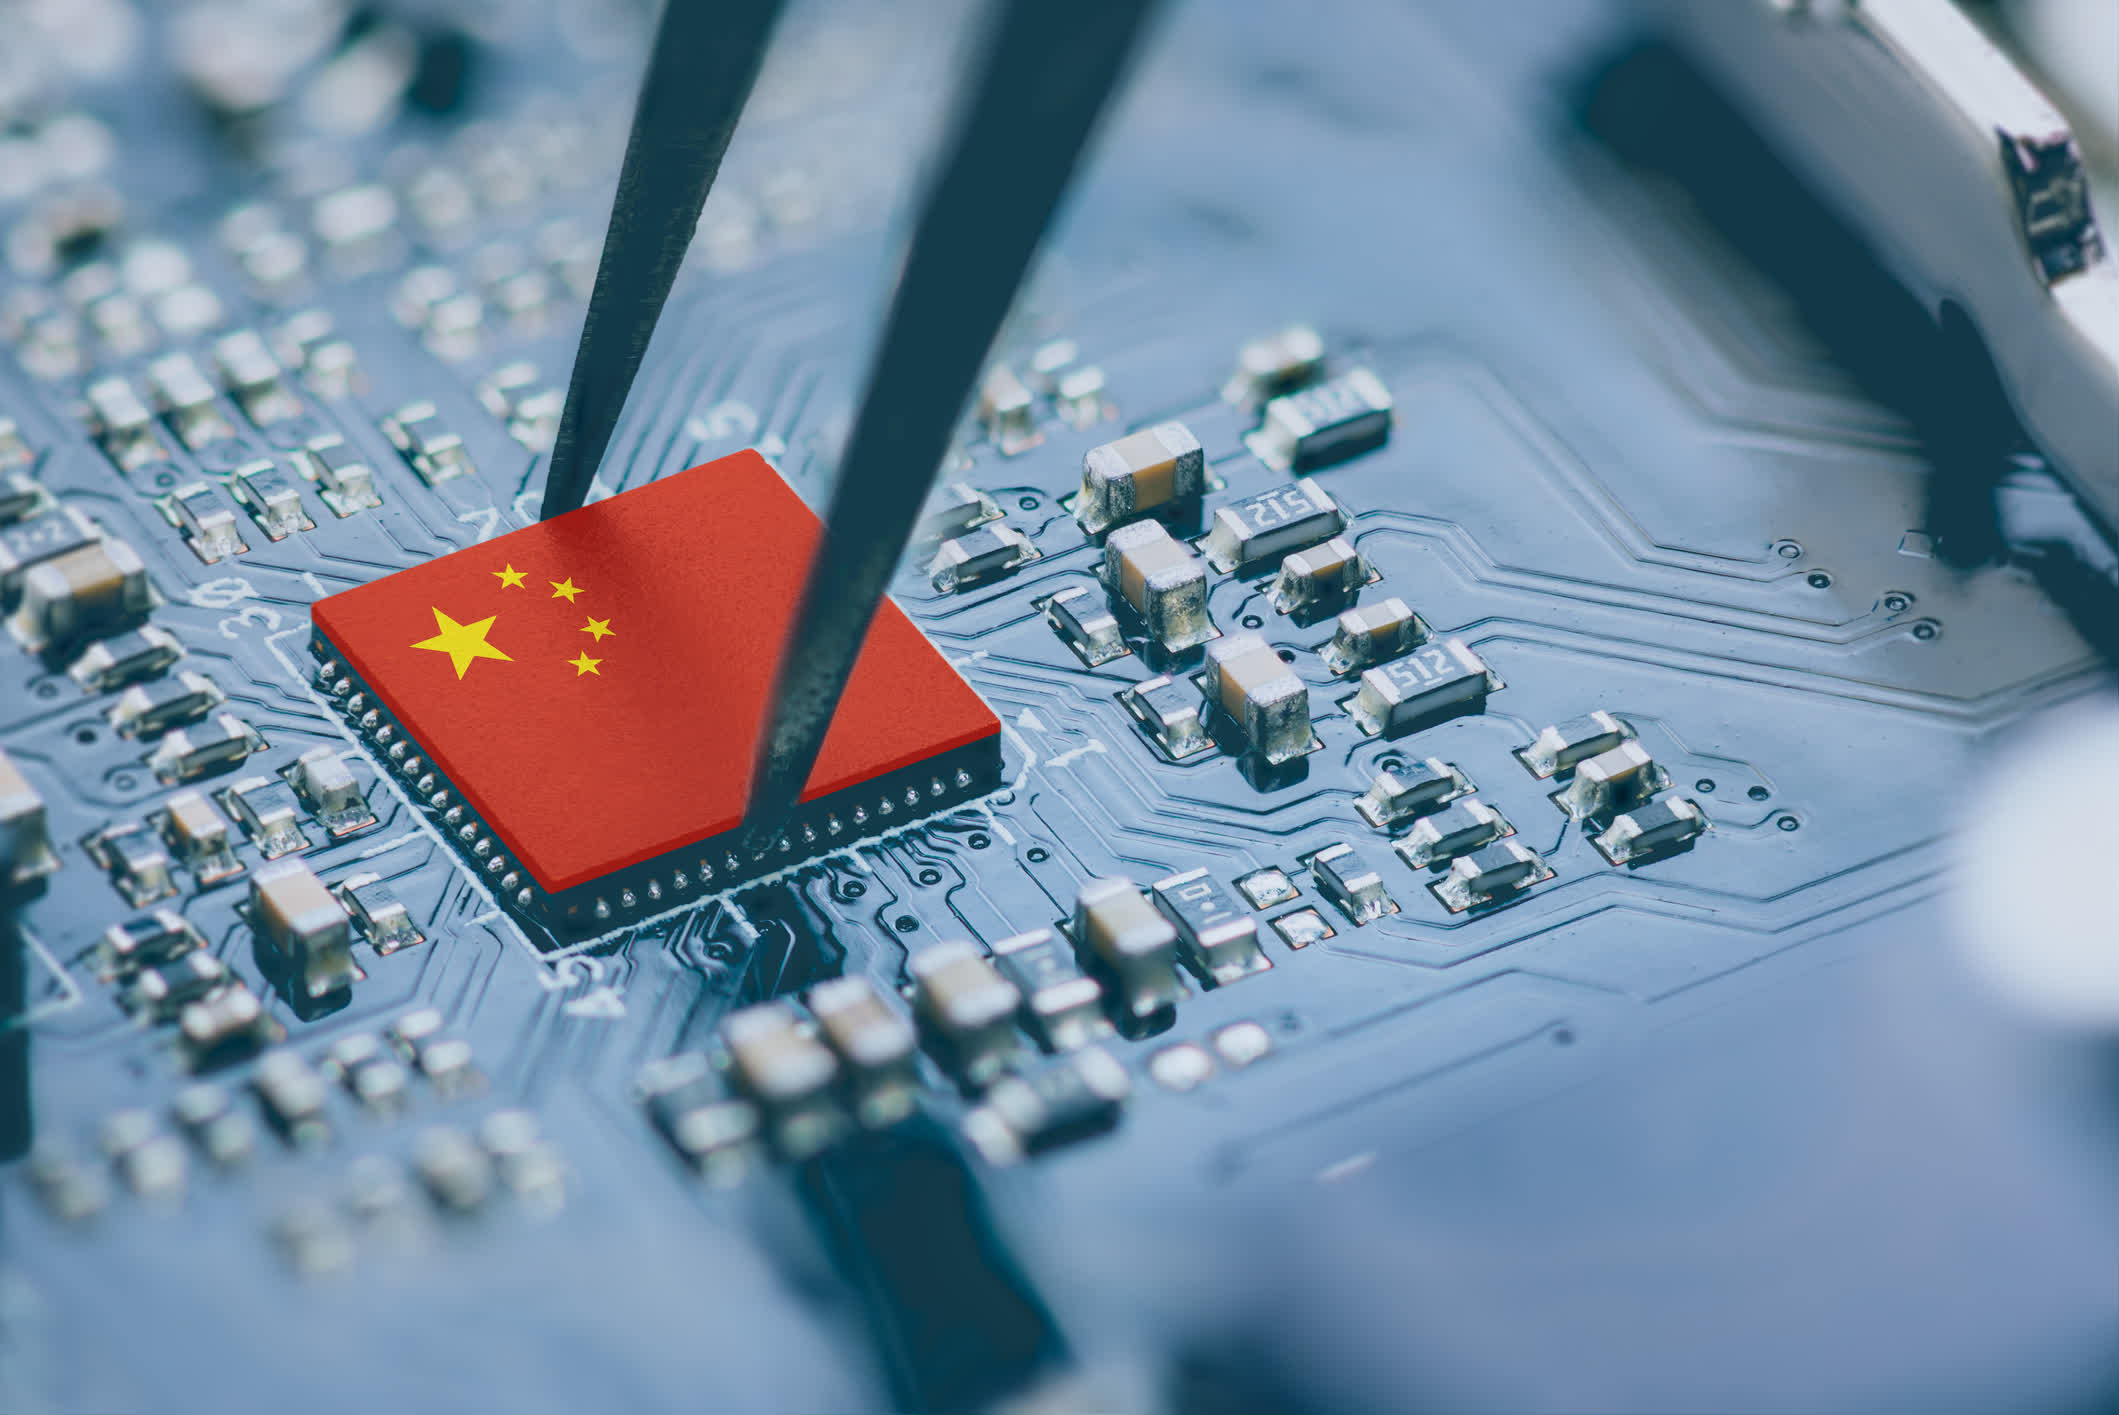 Netherlands and Japan agree to restrict export of chipmaking tools to China